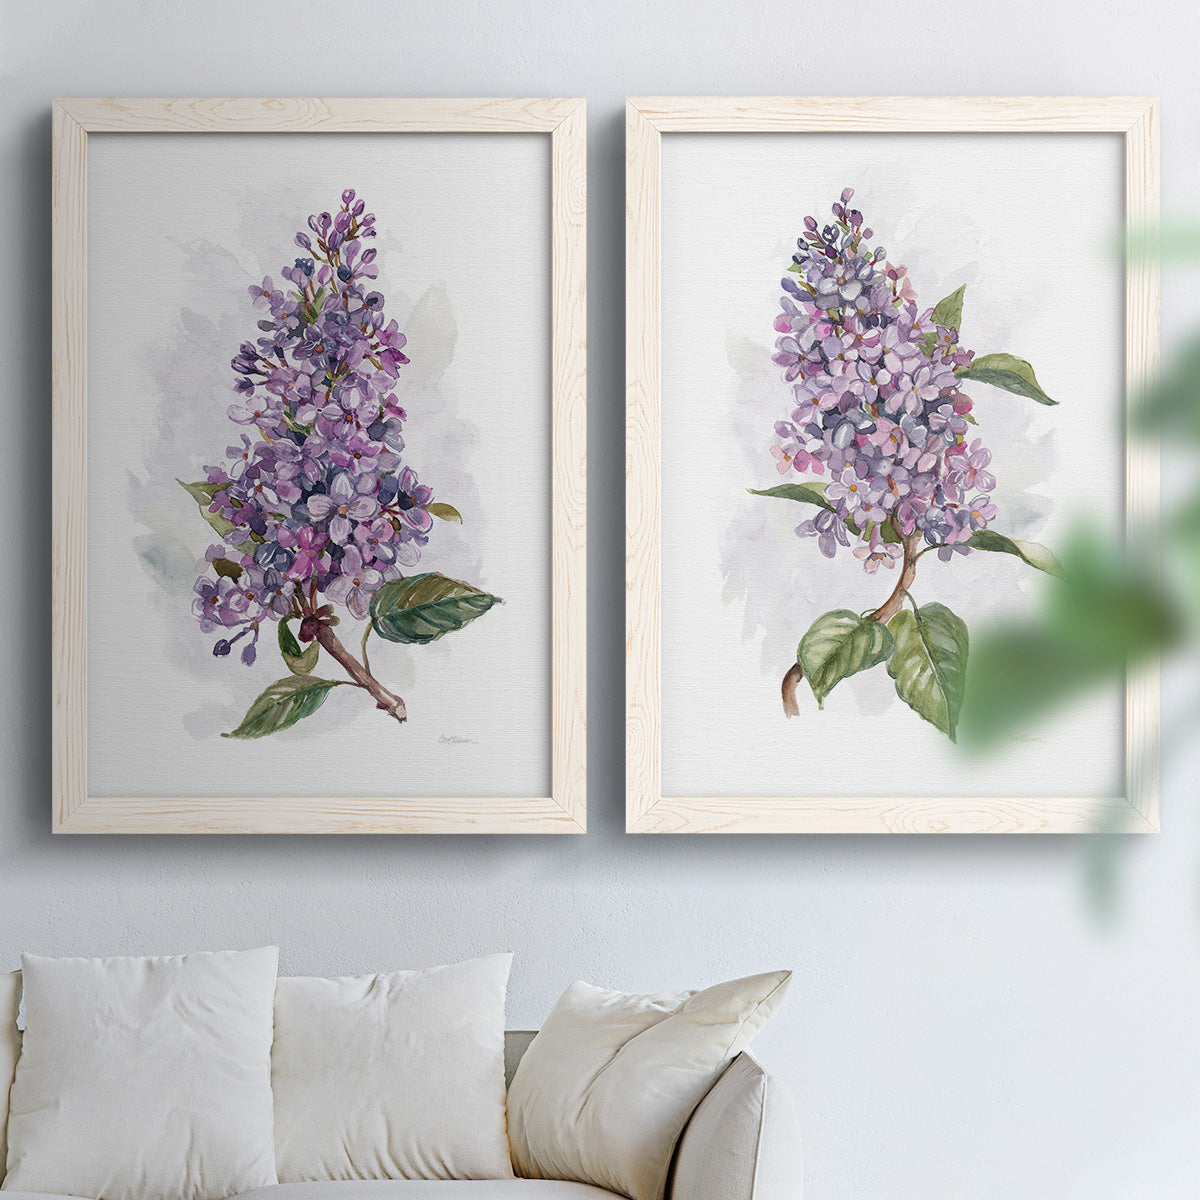 Awash in Lilac I - Premium Framed Canvas 2 Piece Set - Ready to Hang